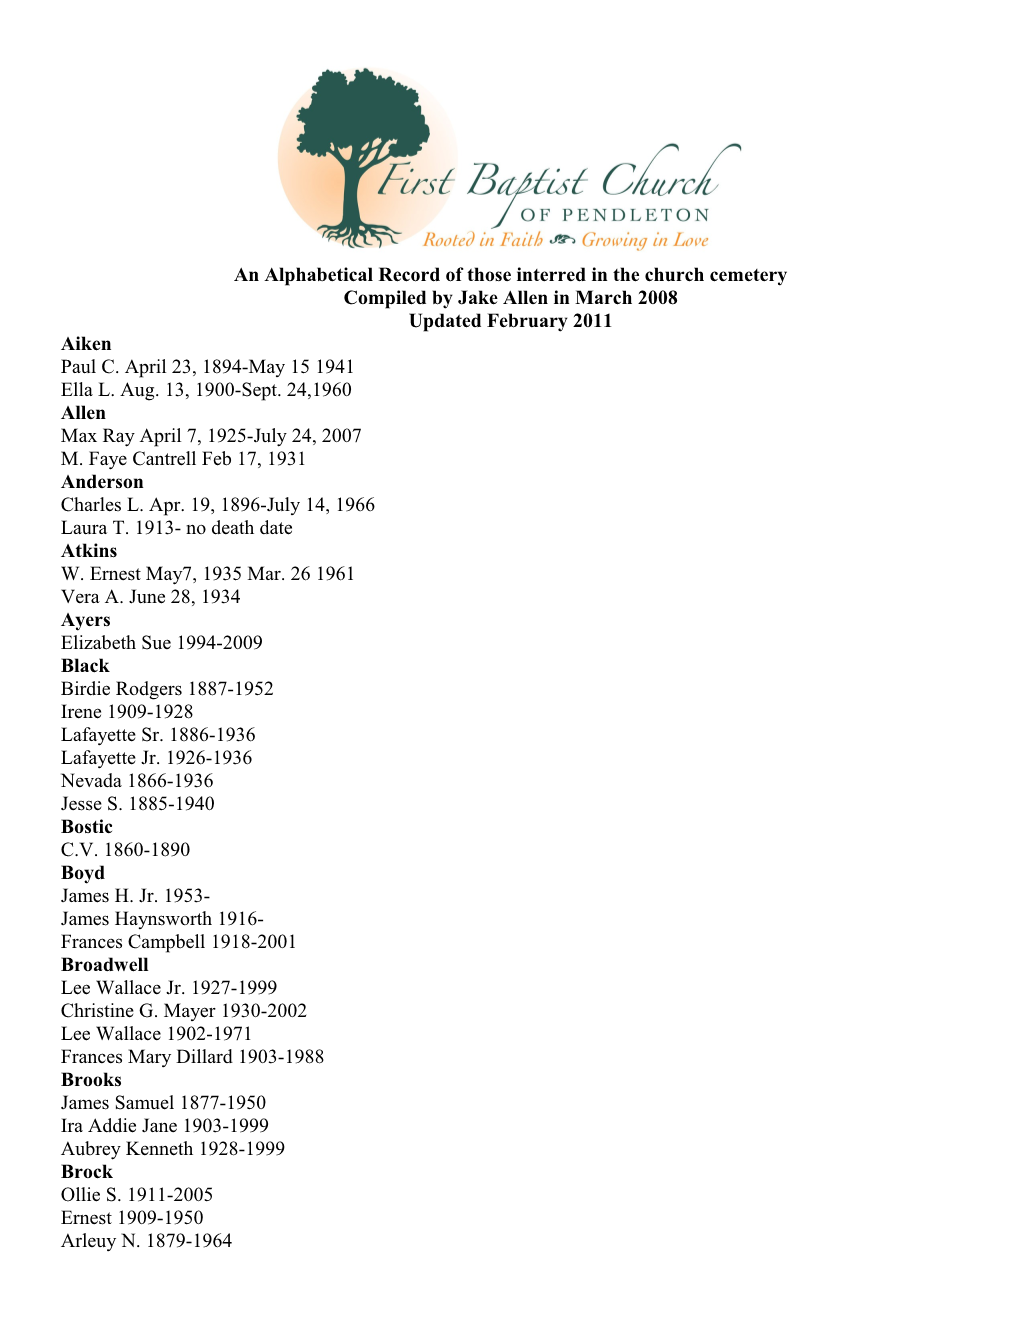 An Alphabetical Record of Those Interred in the Church Cemetery